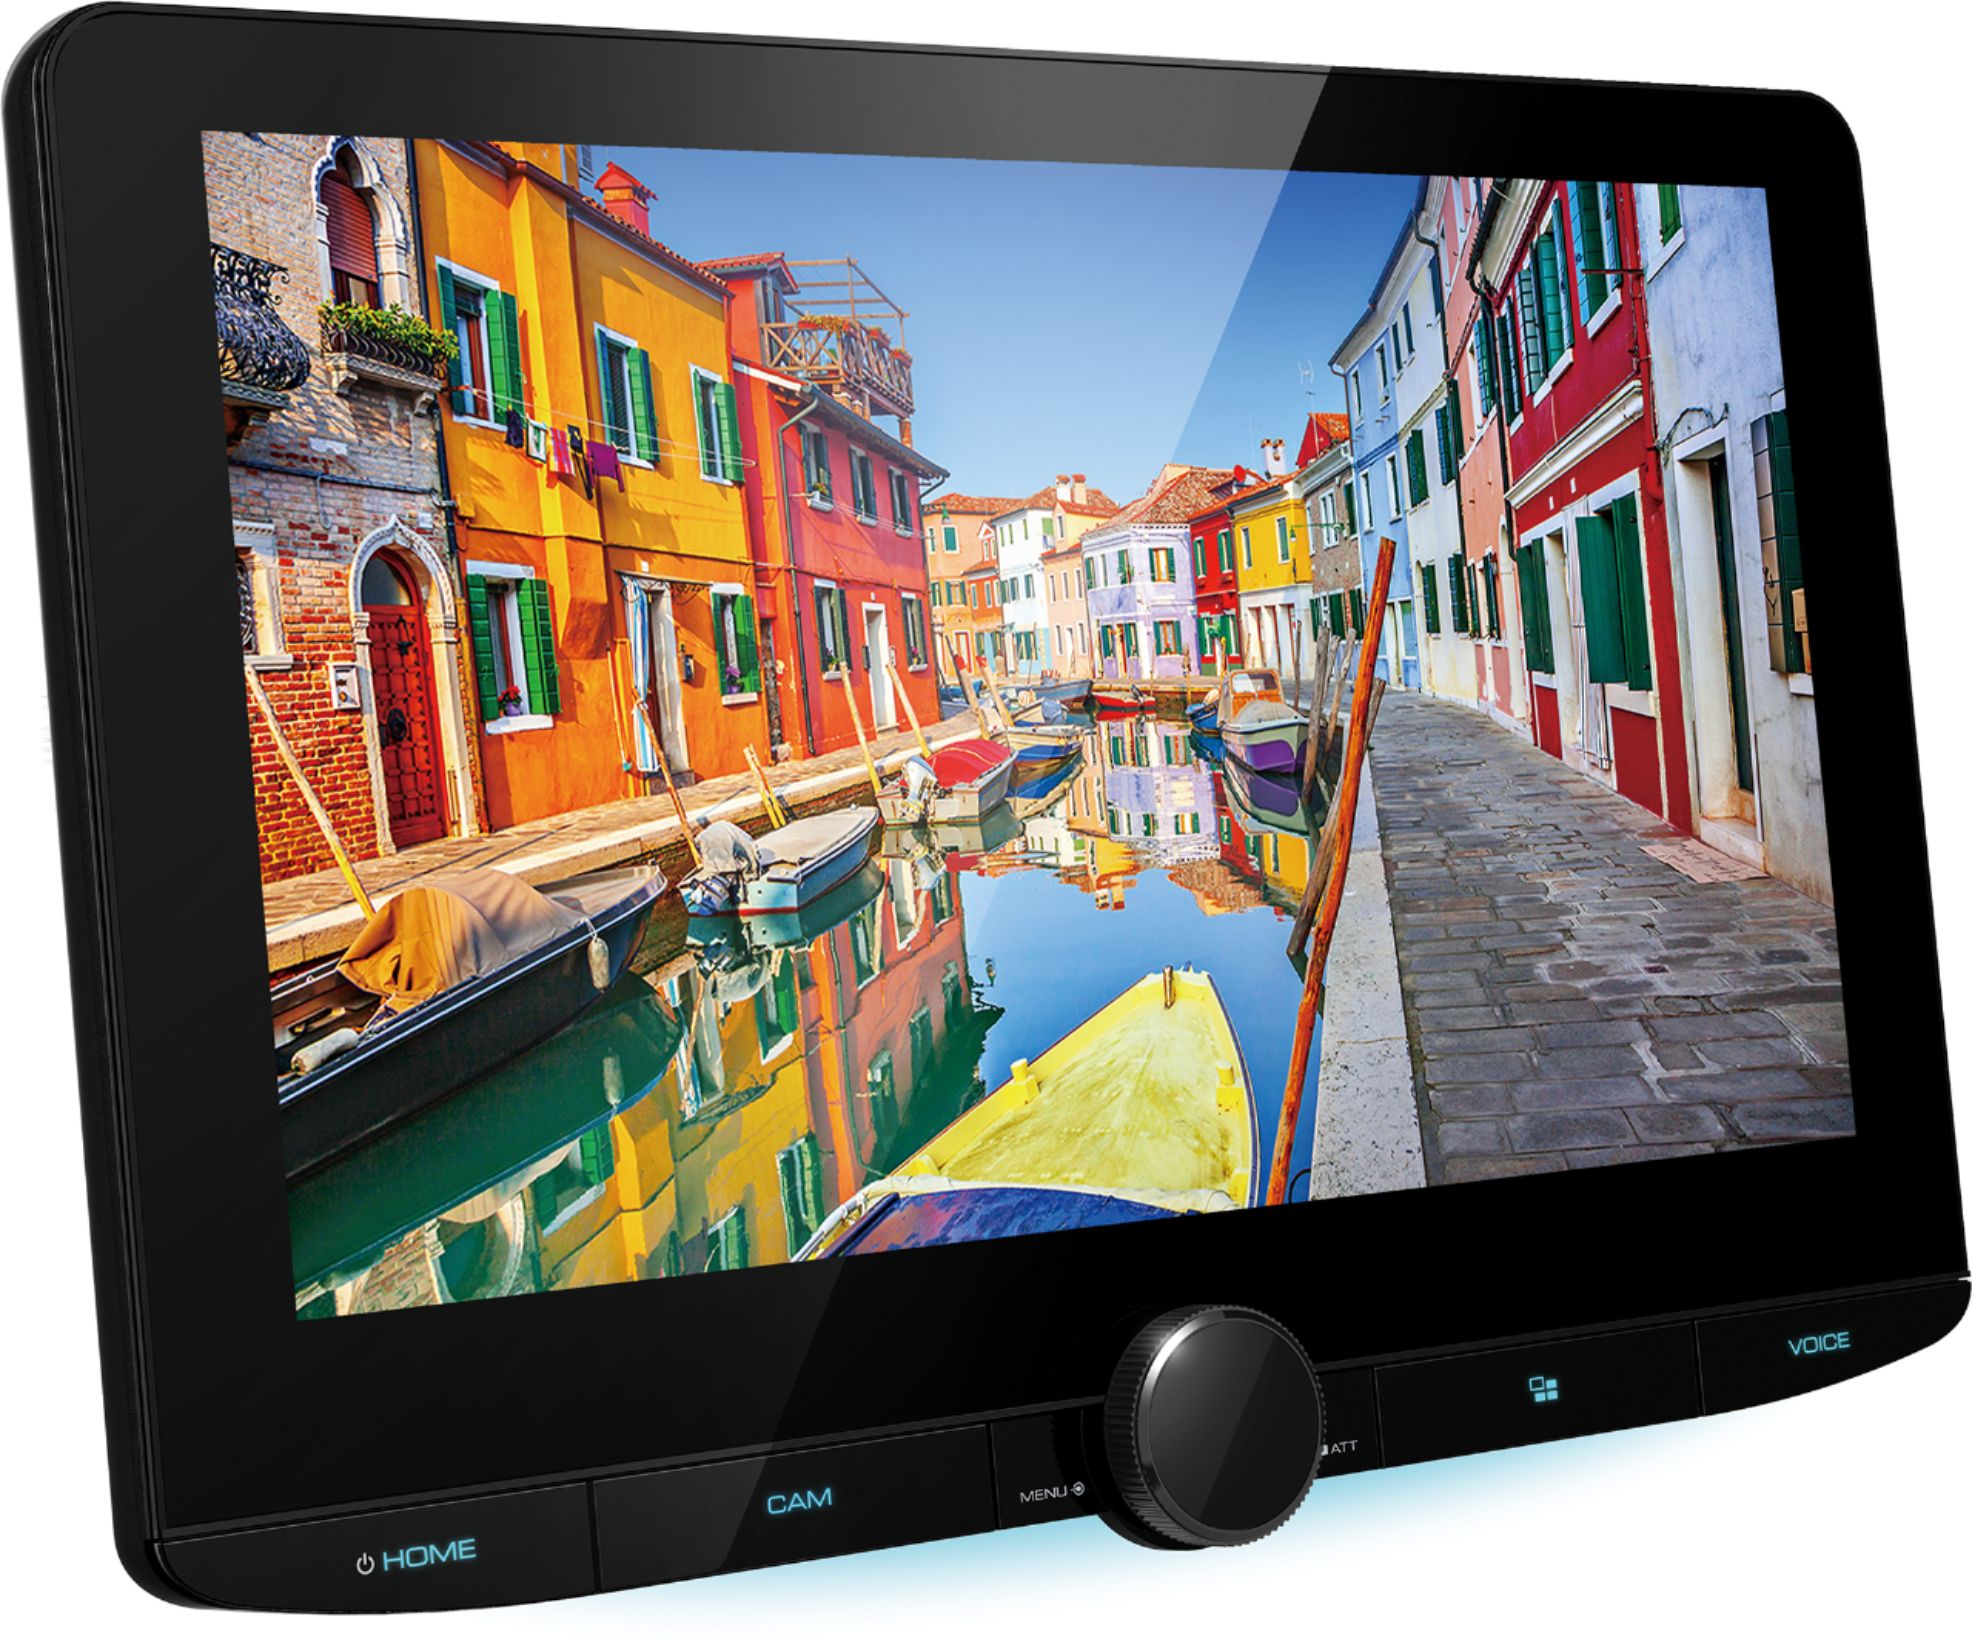 AW7722US 1DIN 10.1 inch, Android, Android navigation, multimedia, car pc  DAB+